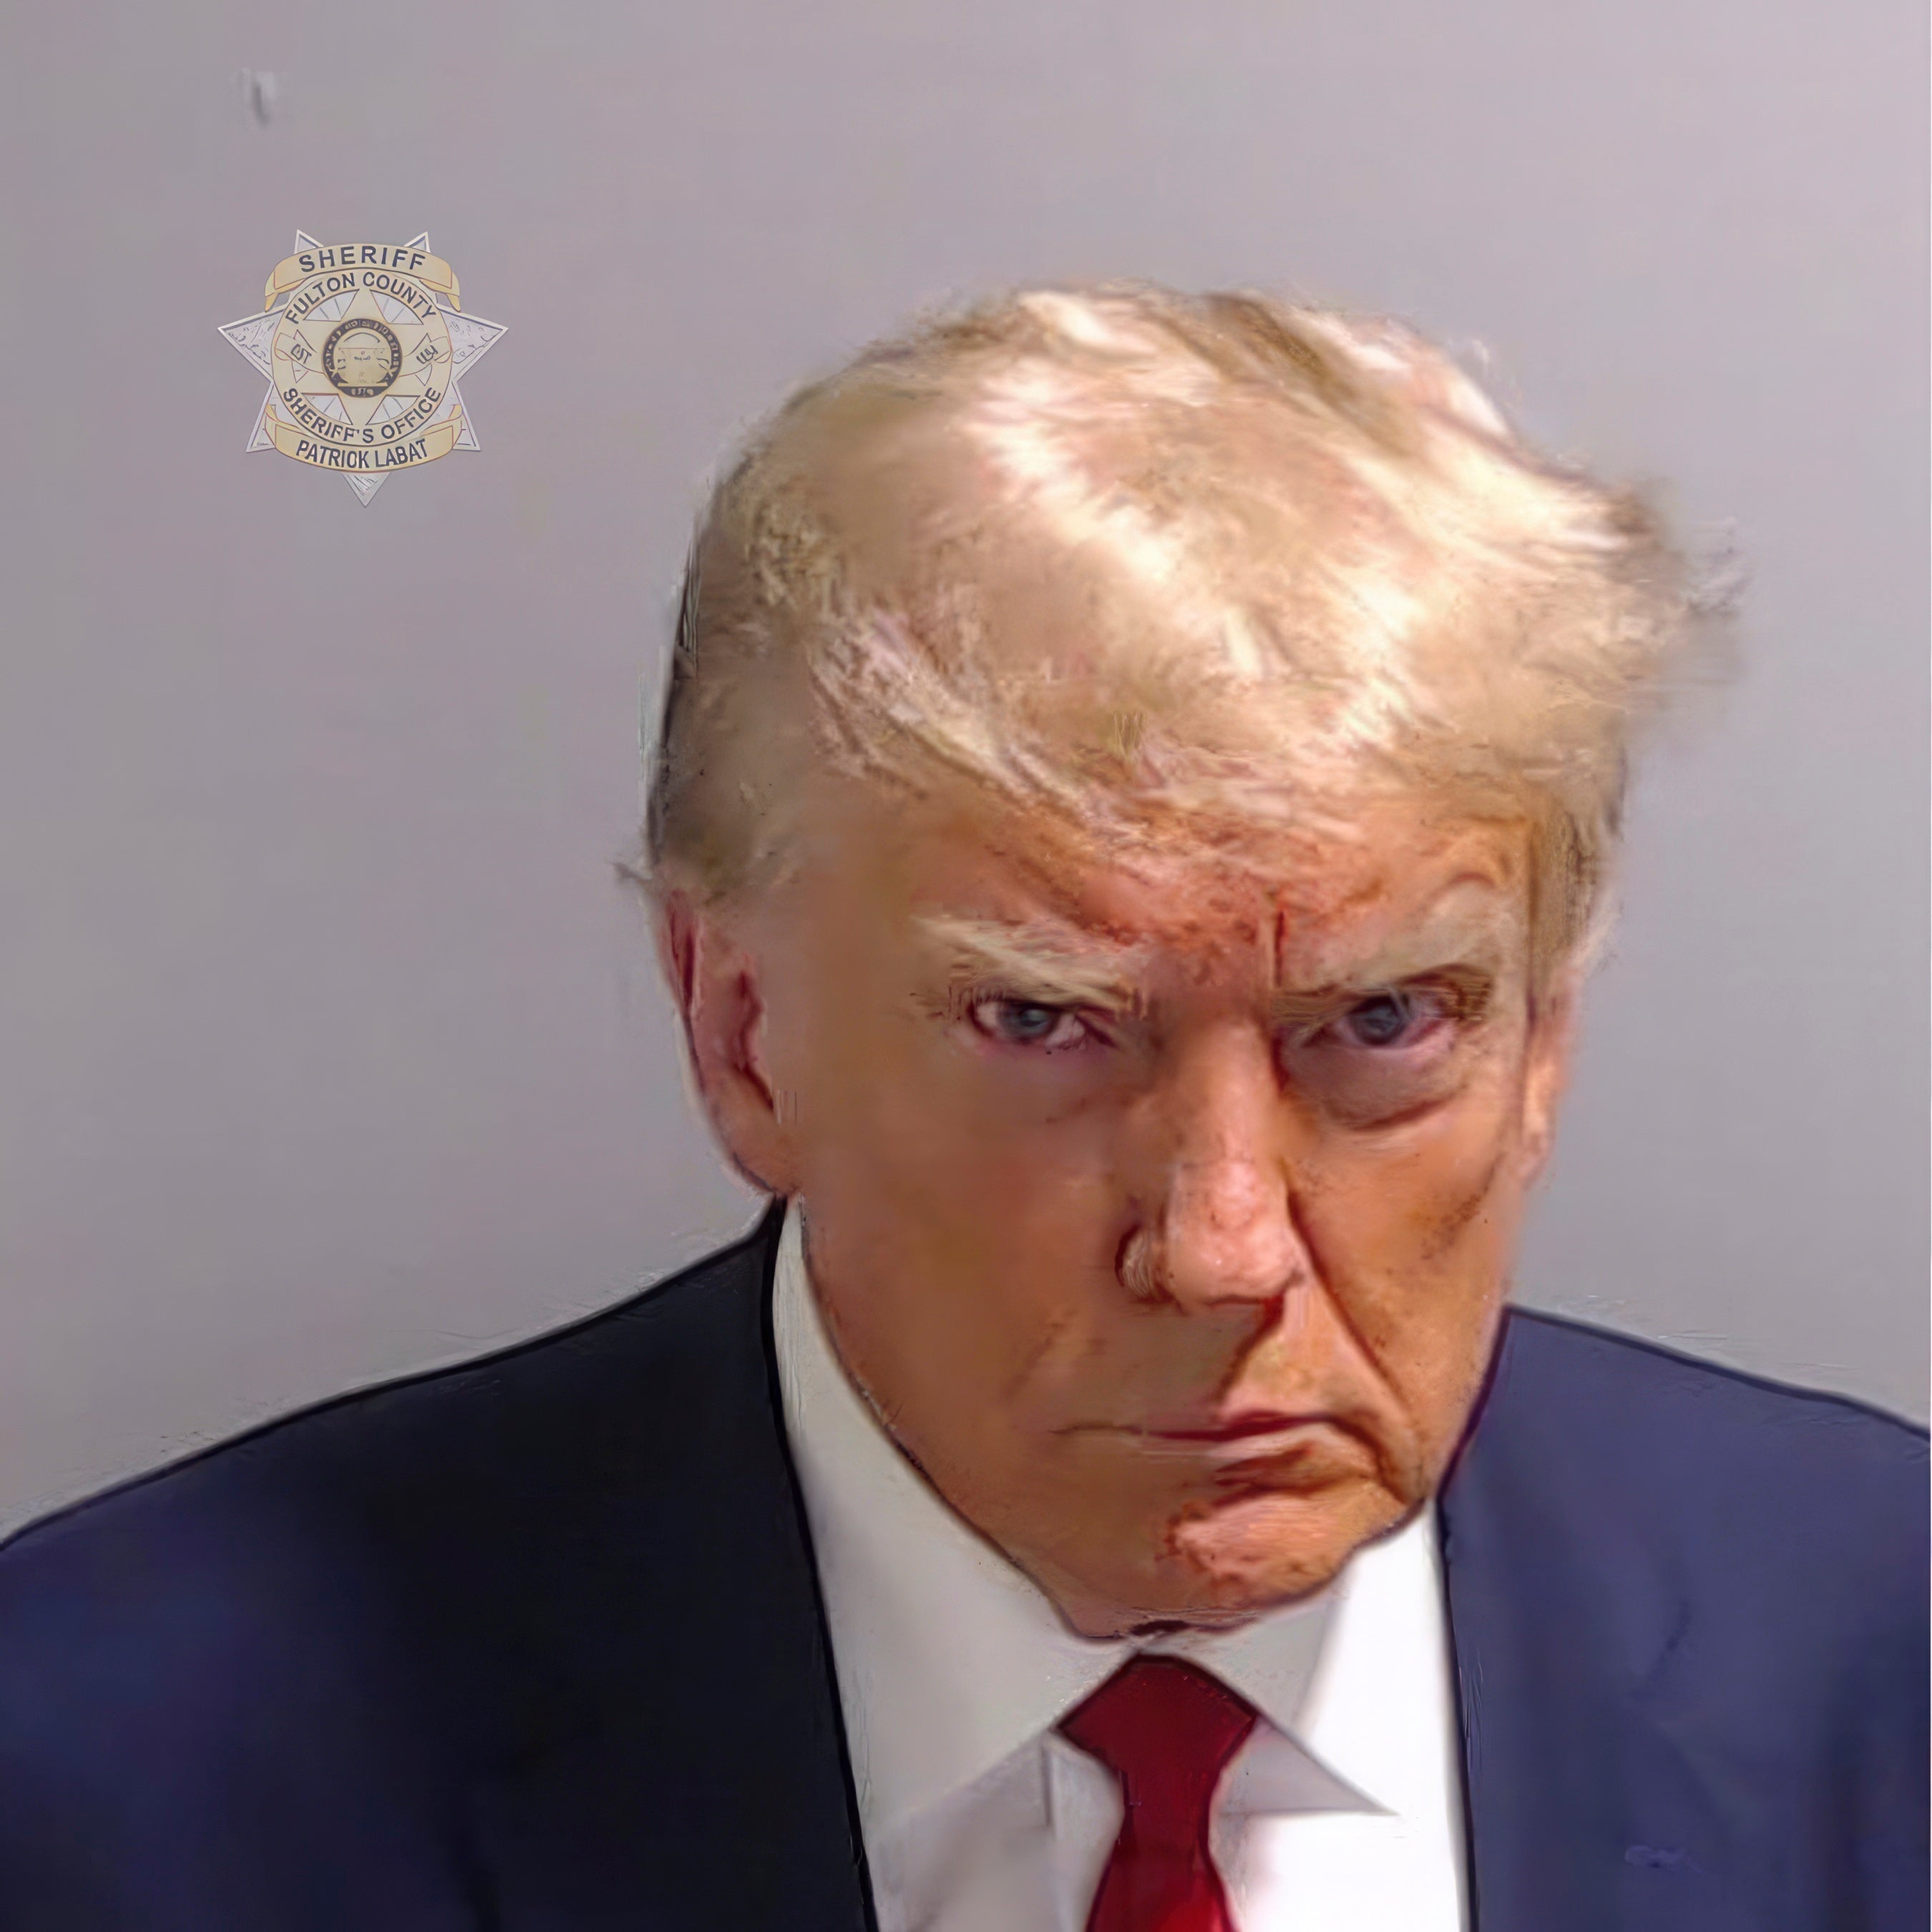 This booking photo provided by Fulton County Sheriff's Office, shows former President Donald Trump